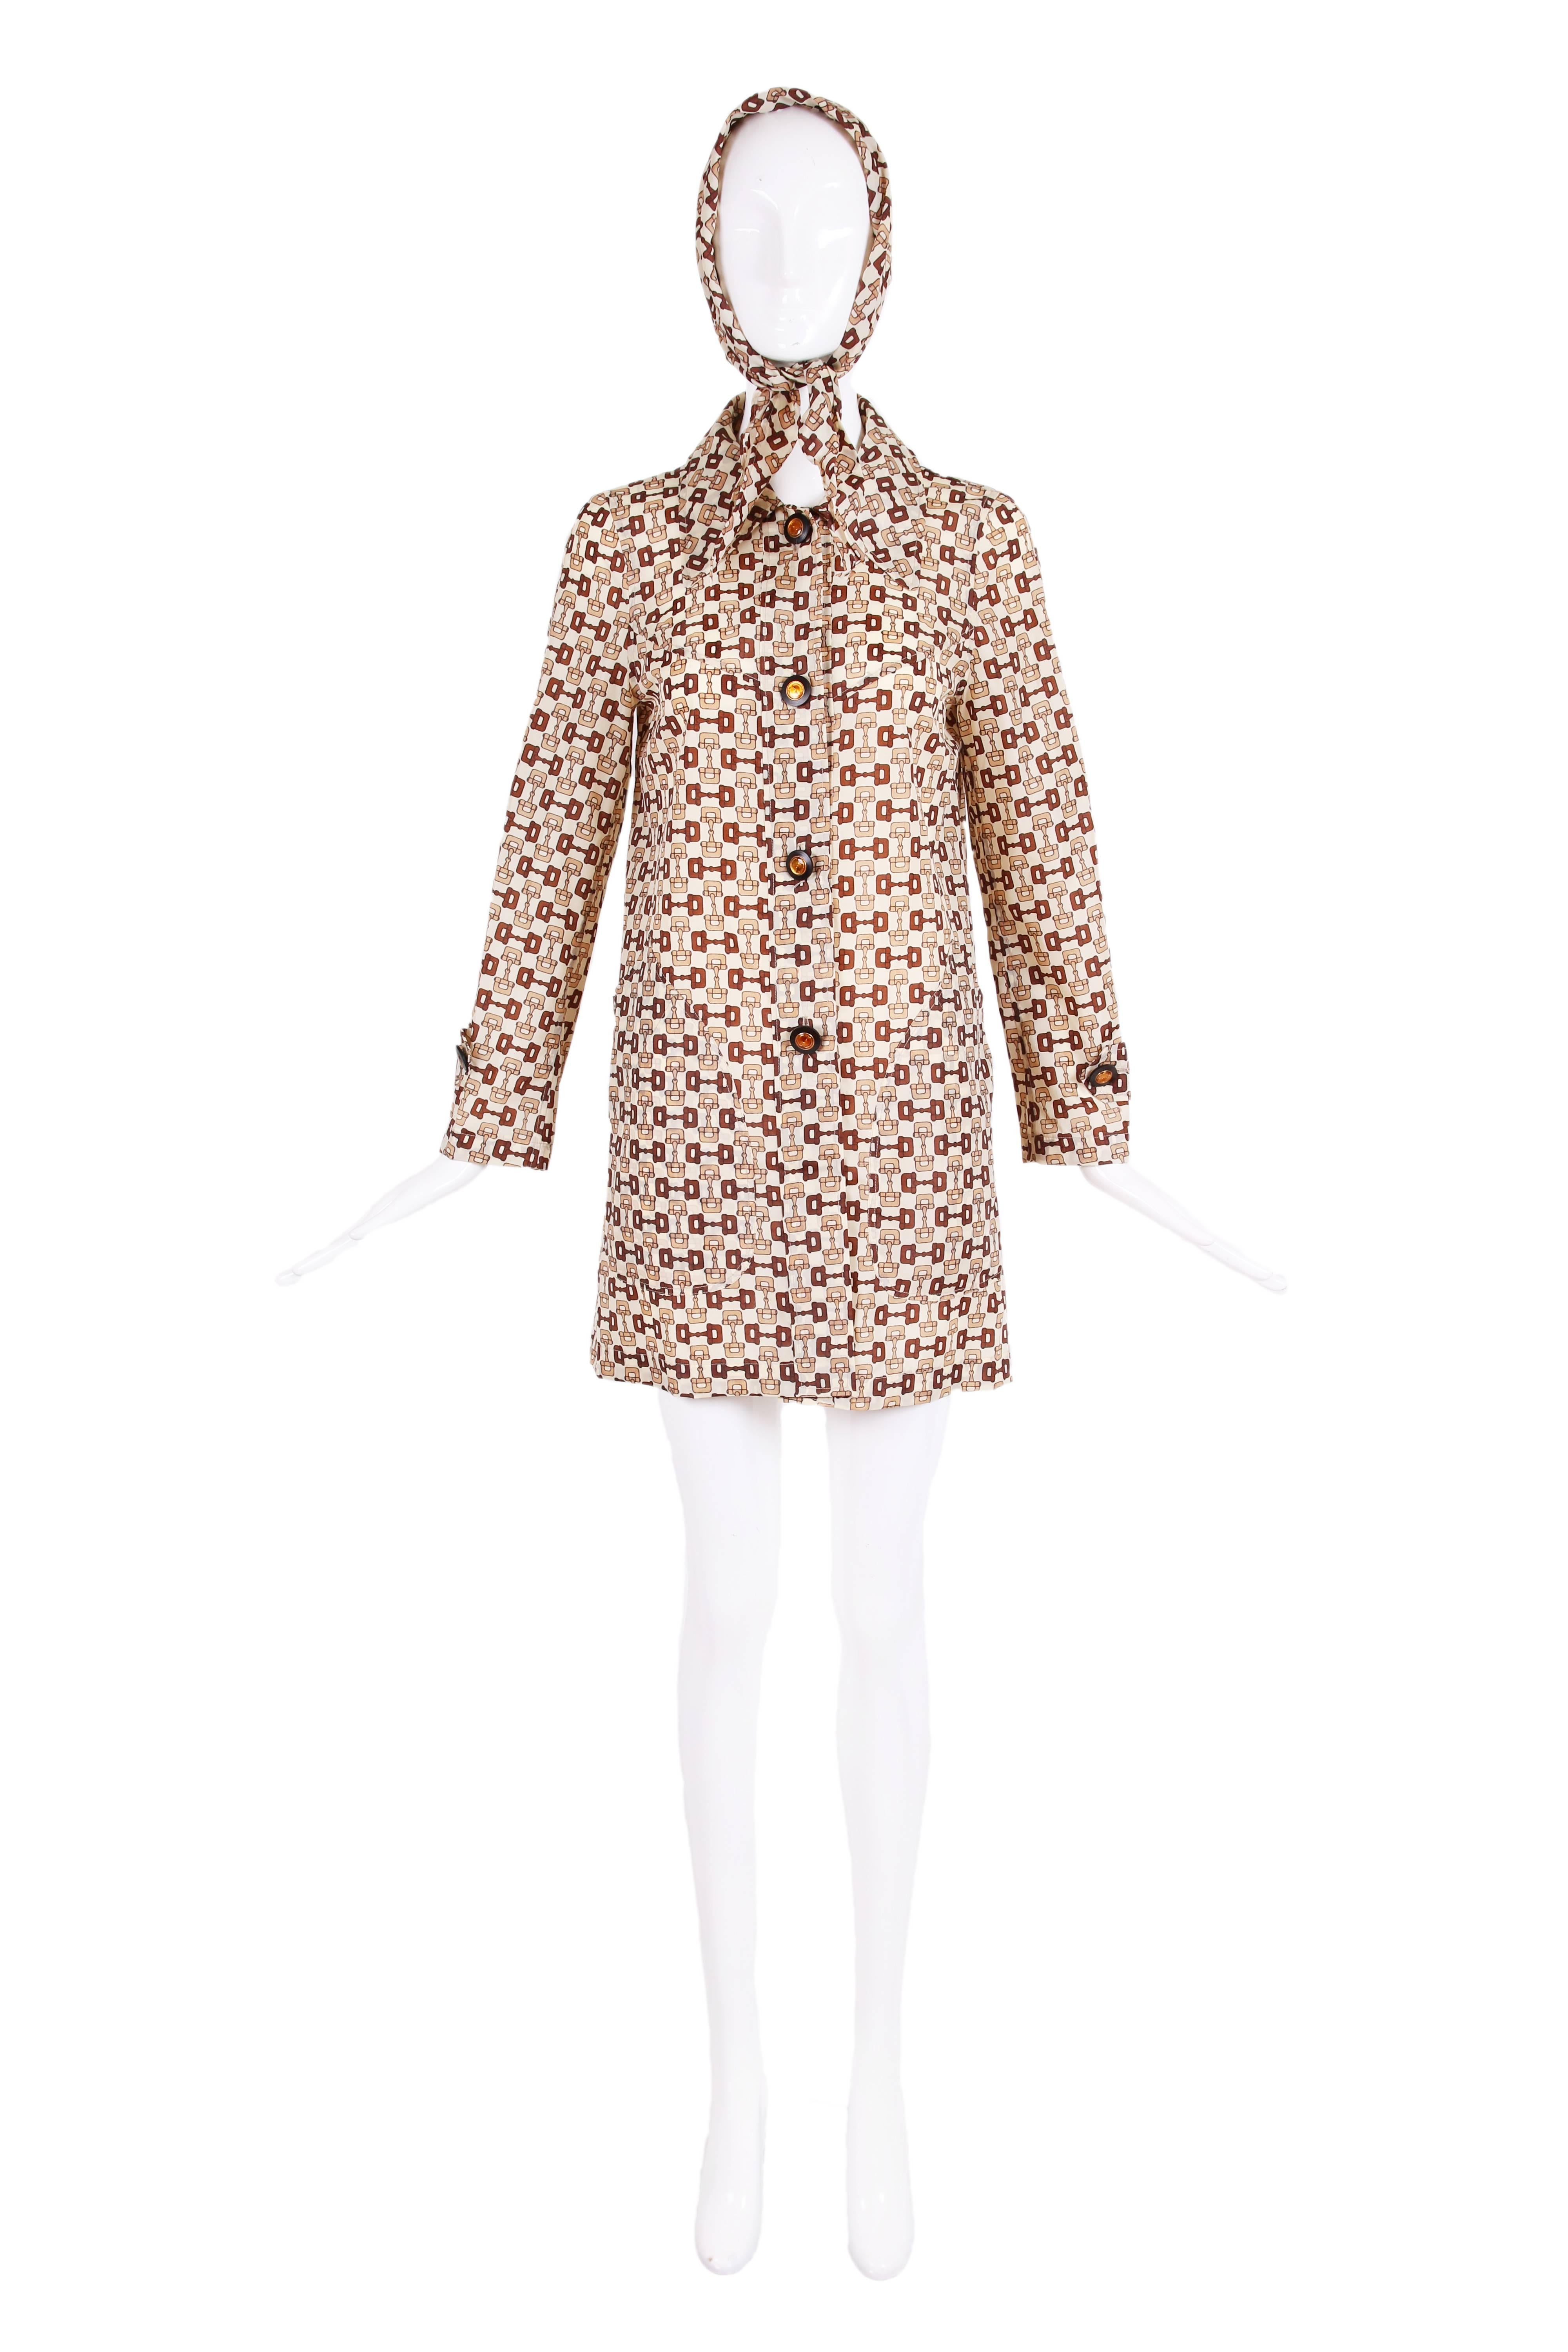 1970's Gucci iconic horsebit print raincoat w/head scarf in shades of cream, tan and brown. Gucci logo included in print in three places. Features two excellently designed frontal pockets and four glazed Gucci button closures down center front and